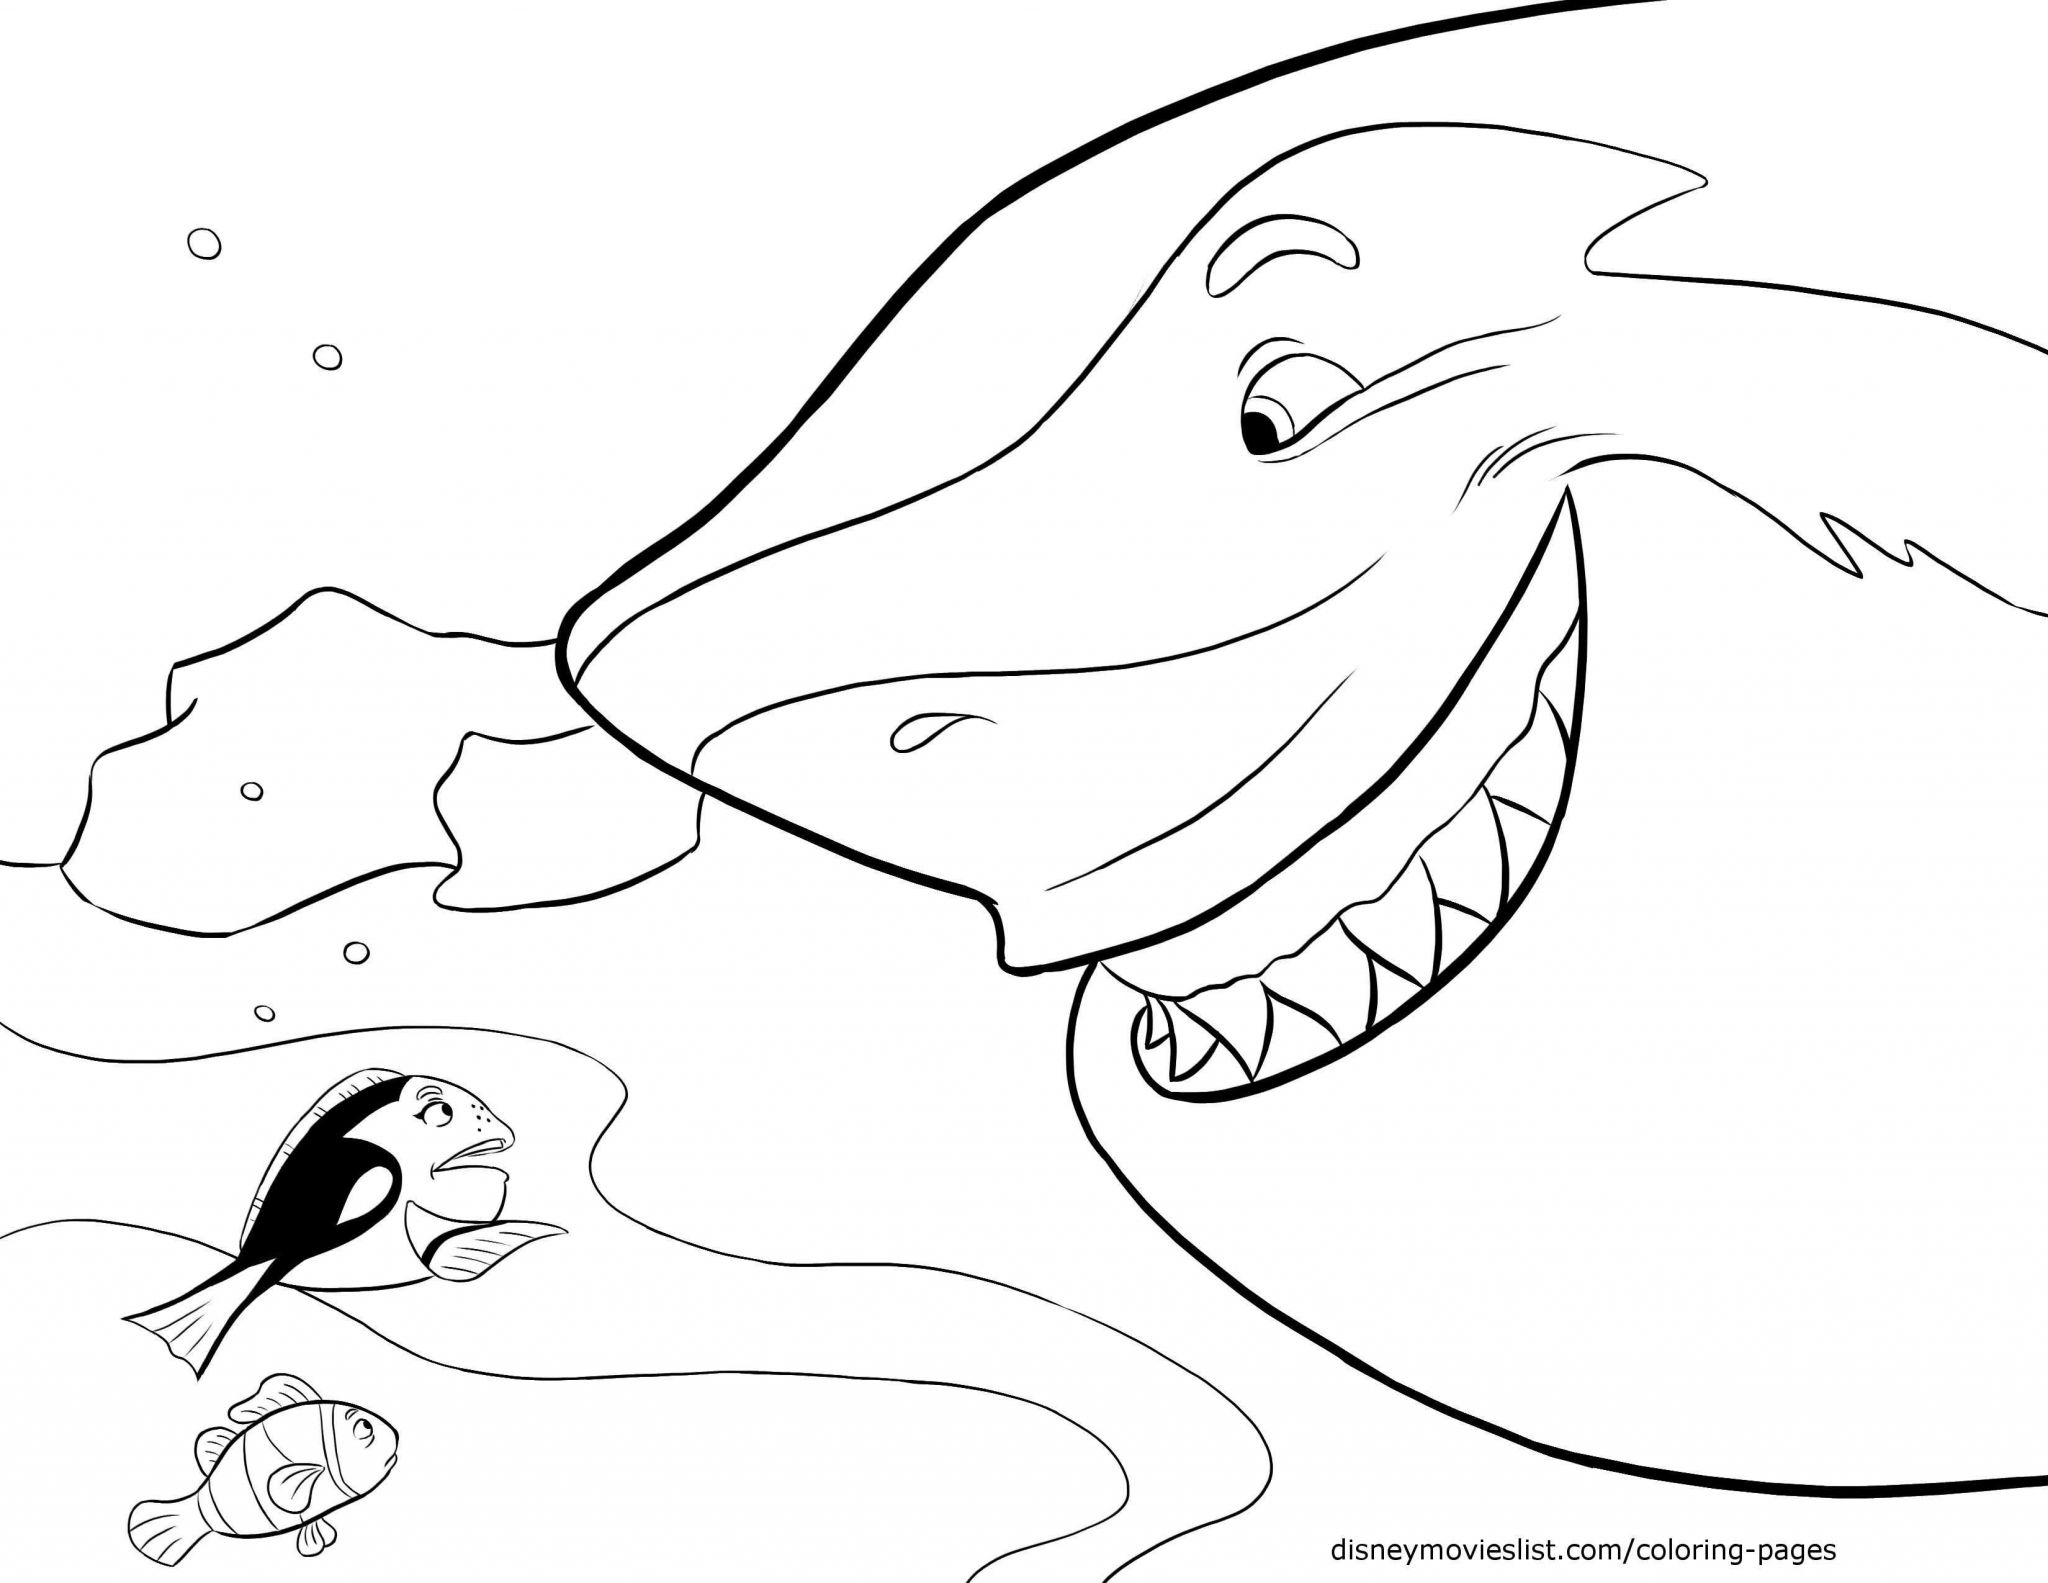 Finding Nemo Worksheet or Finding Dory Coloring Pages Printable at Getcolorings